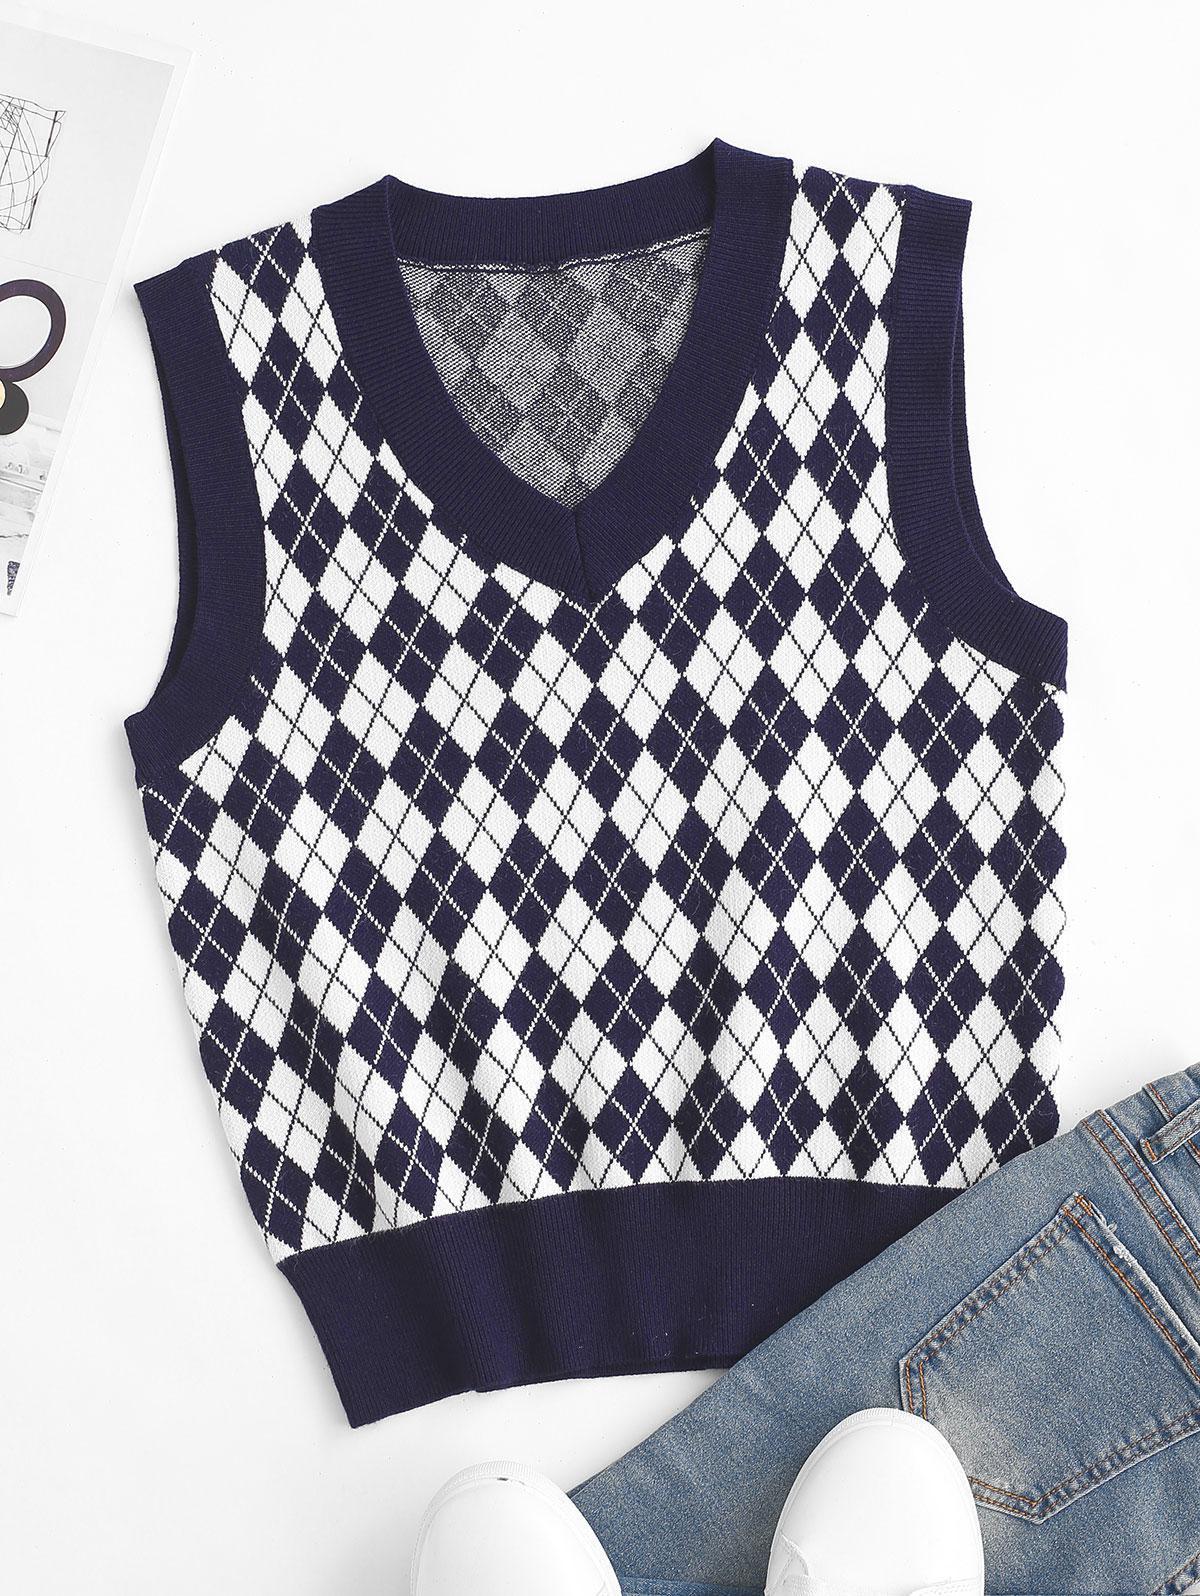 Zaful Synthetic Argyle V Neck Sweater Vest in Deep Blue Womens Clothing Jumpers and knitwear Jumpers Grey 